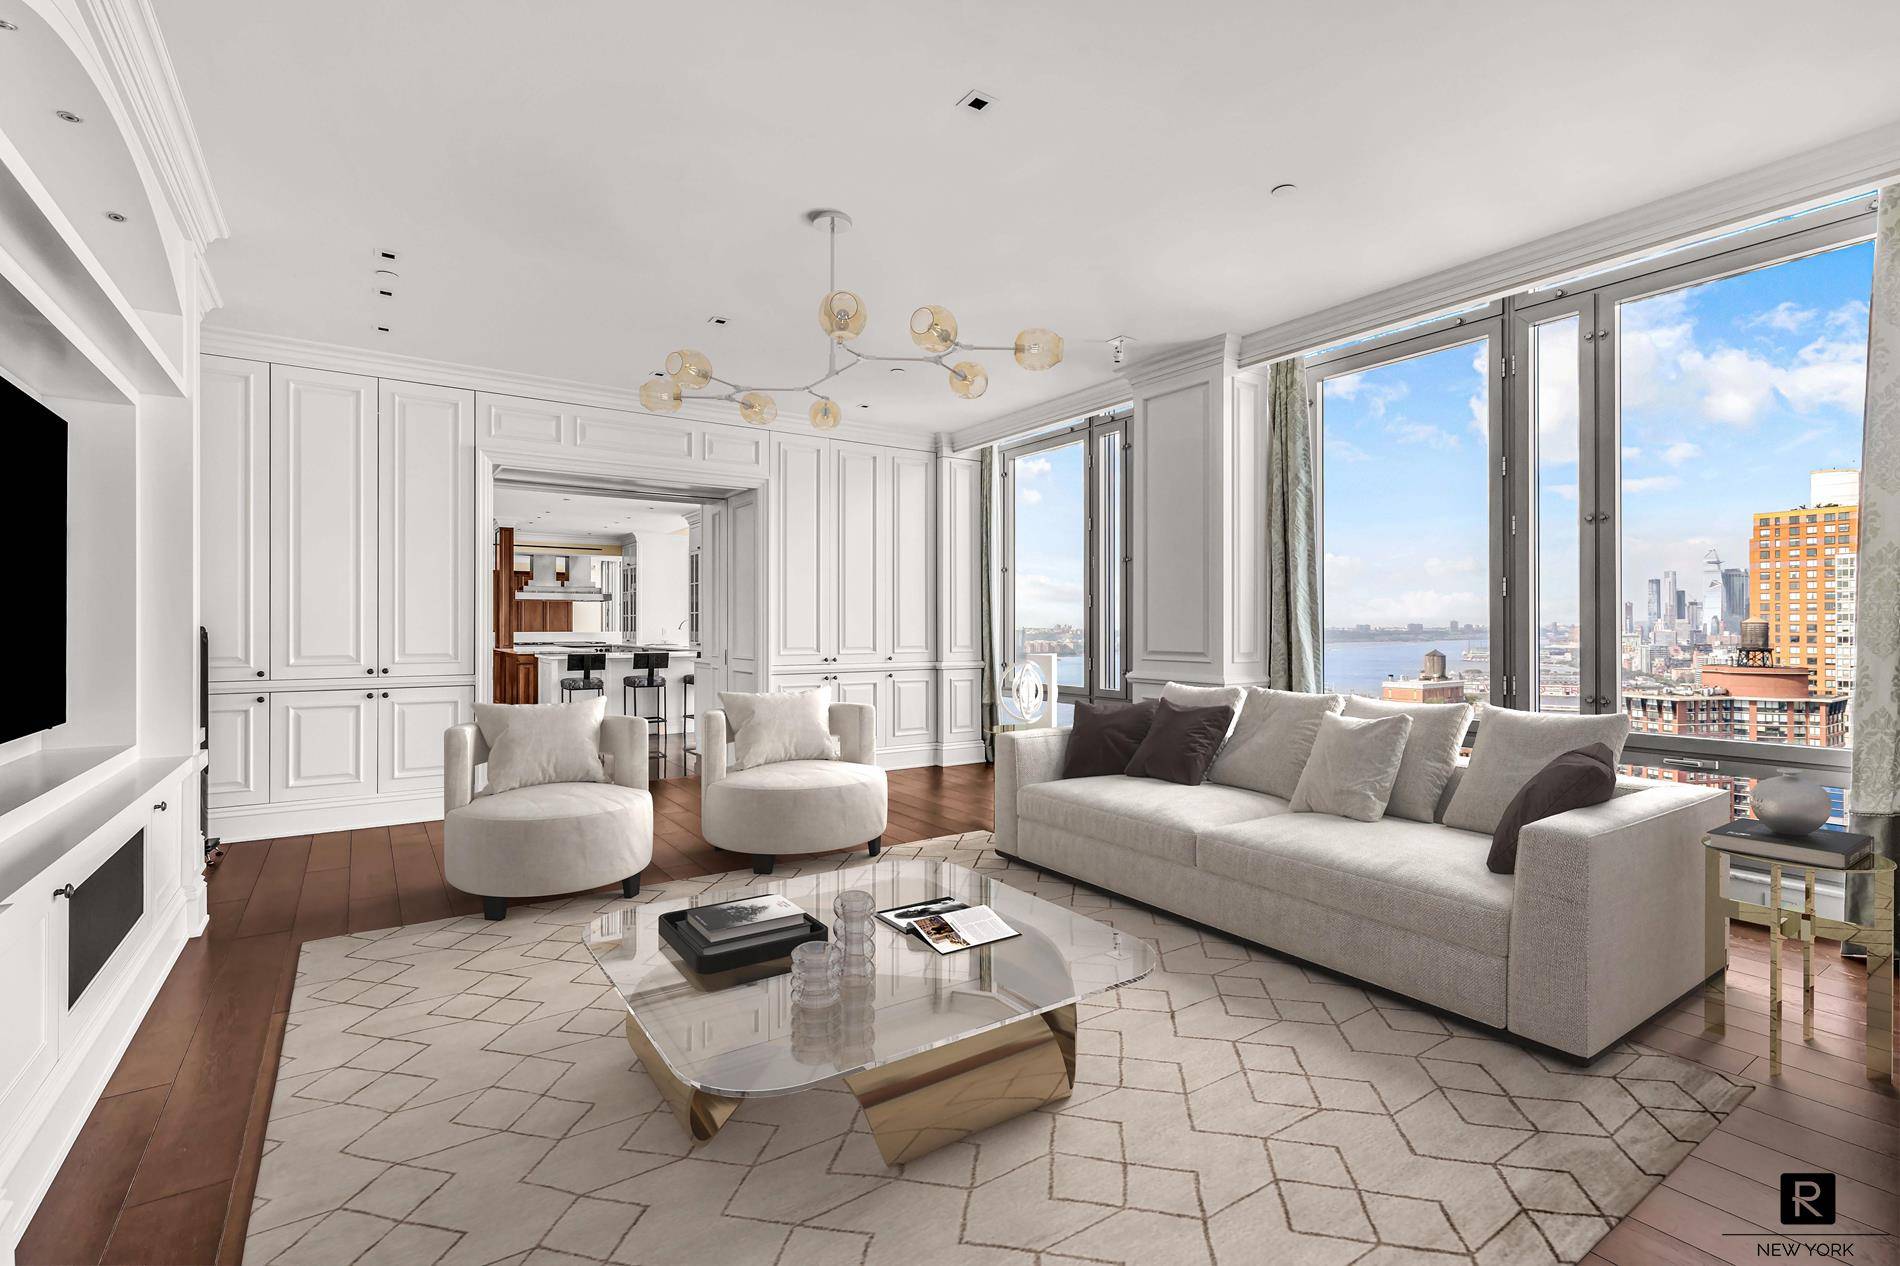 Penthouse 3, the crown atop the Riverhouse Condominium, is an exceptional 4, 749sqft 4 bedroom, 5.